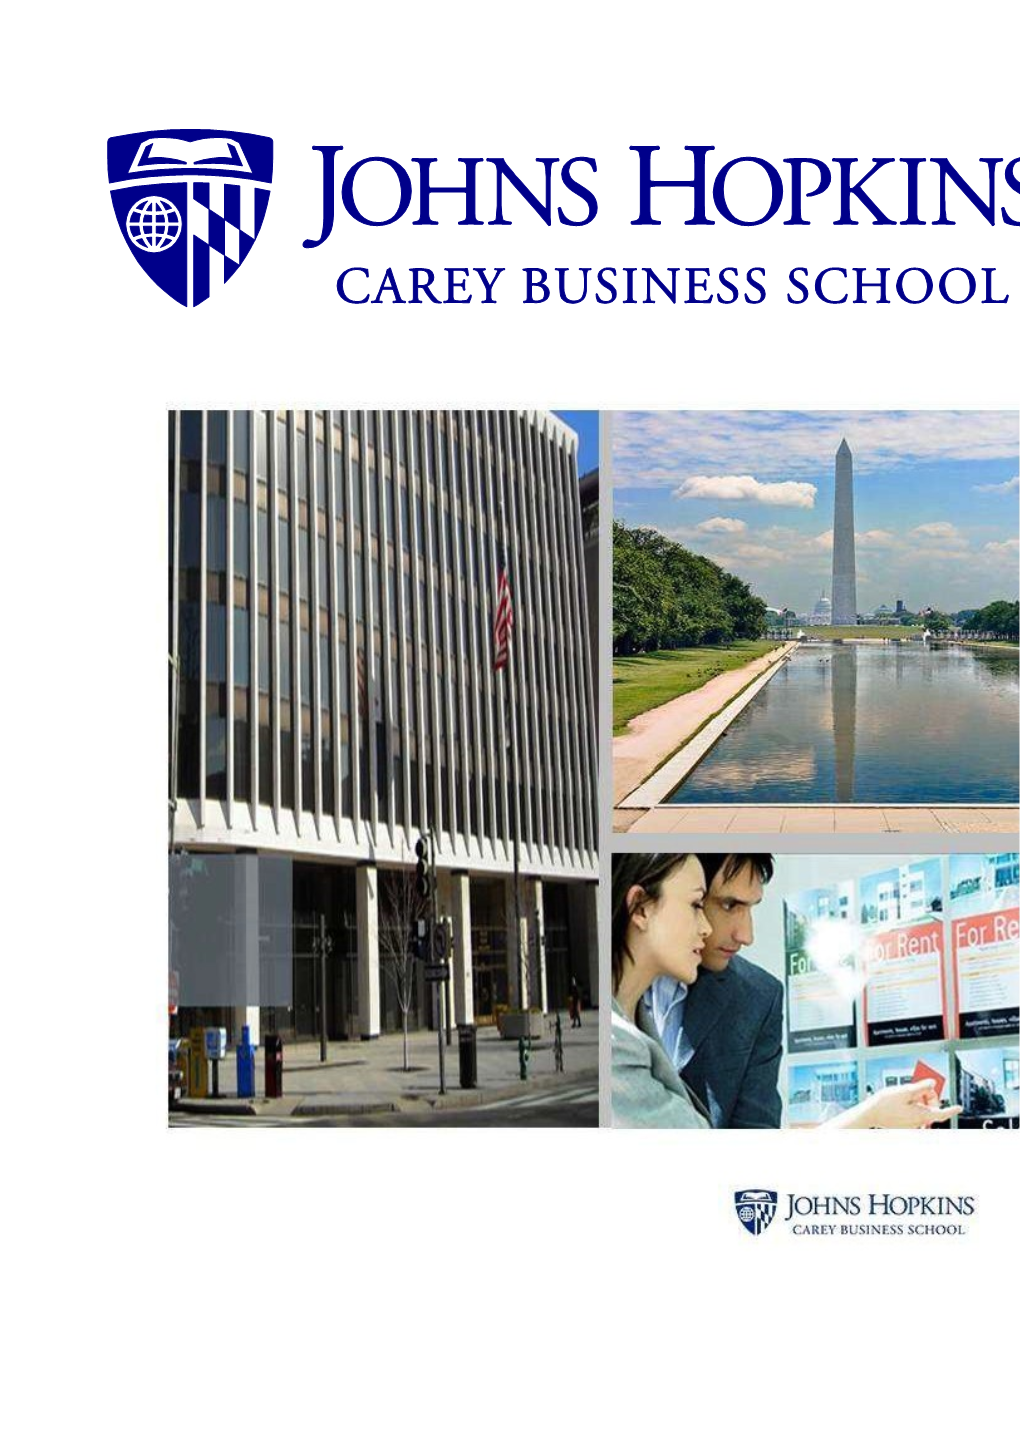 Welcome to Johns Hopkins Carey Business School. We Hope That This Resource Will Help You